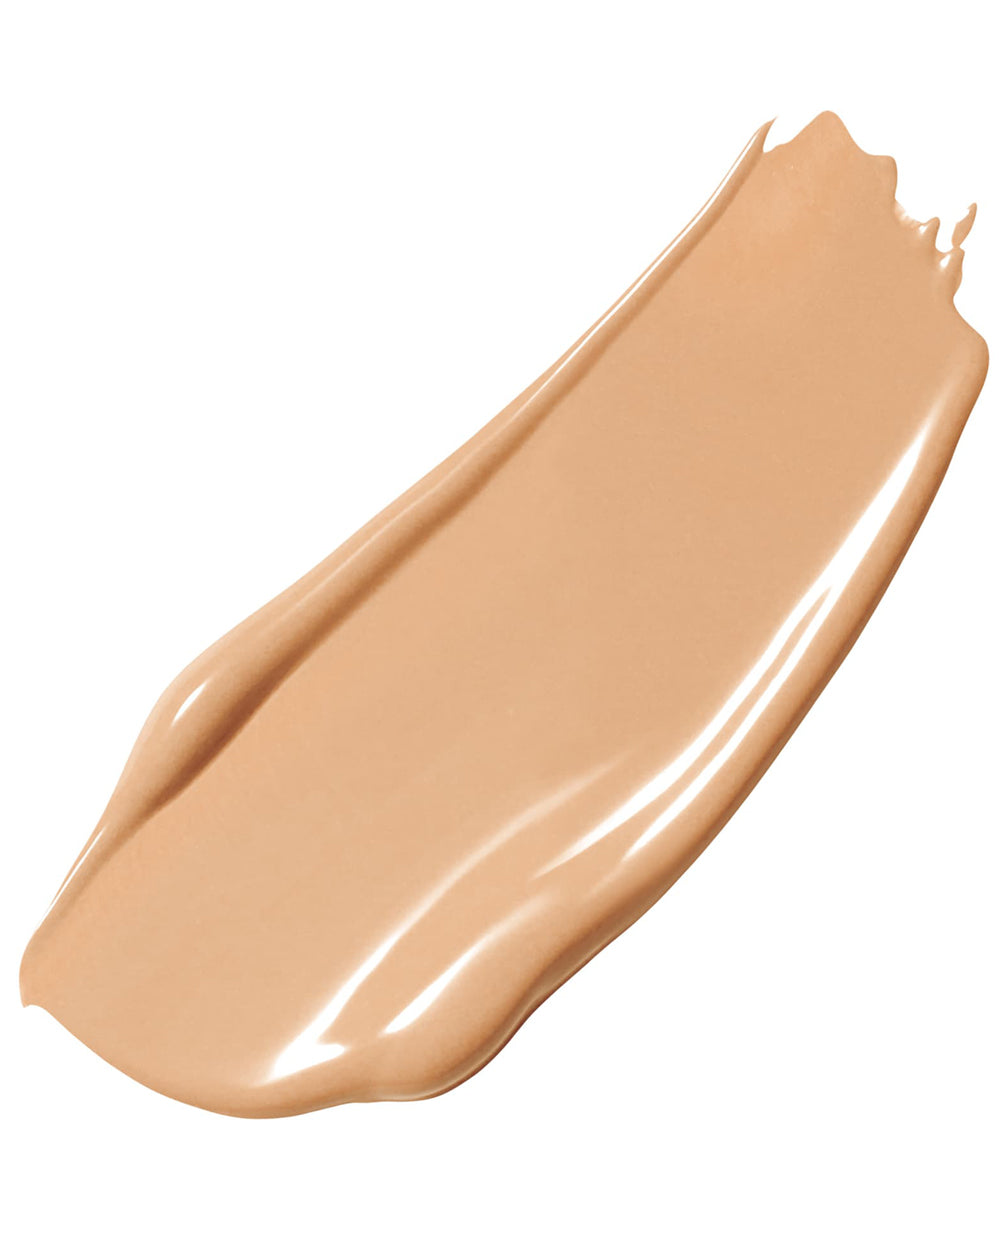 Flawless Lumiere Foundation in 1C0 Cameo